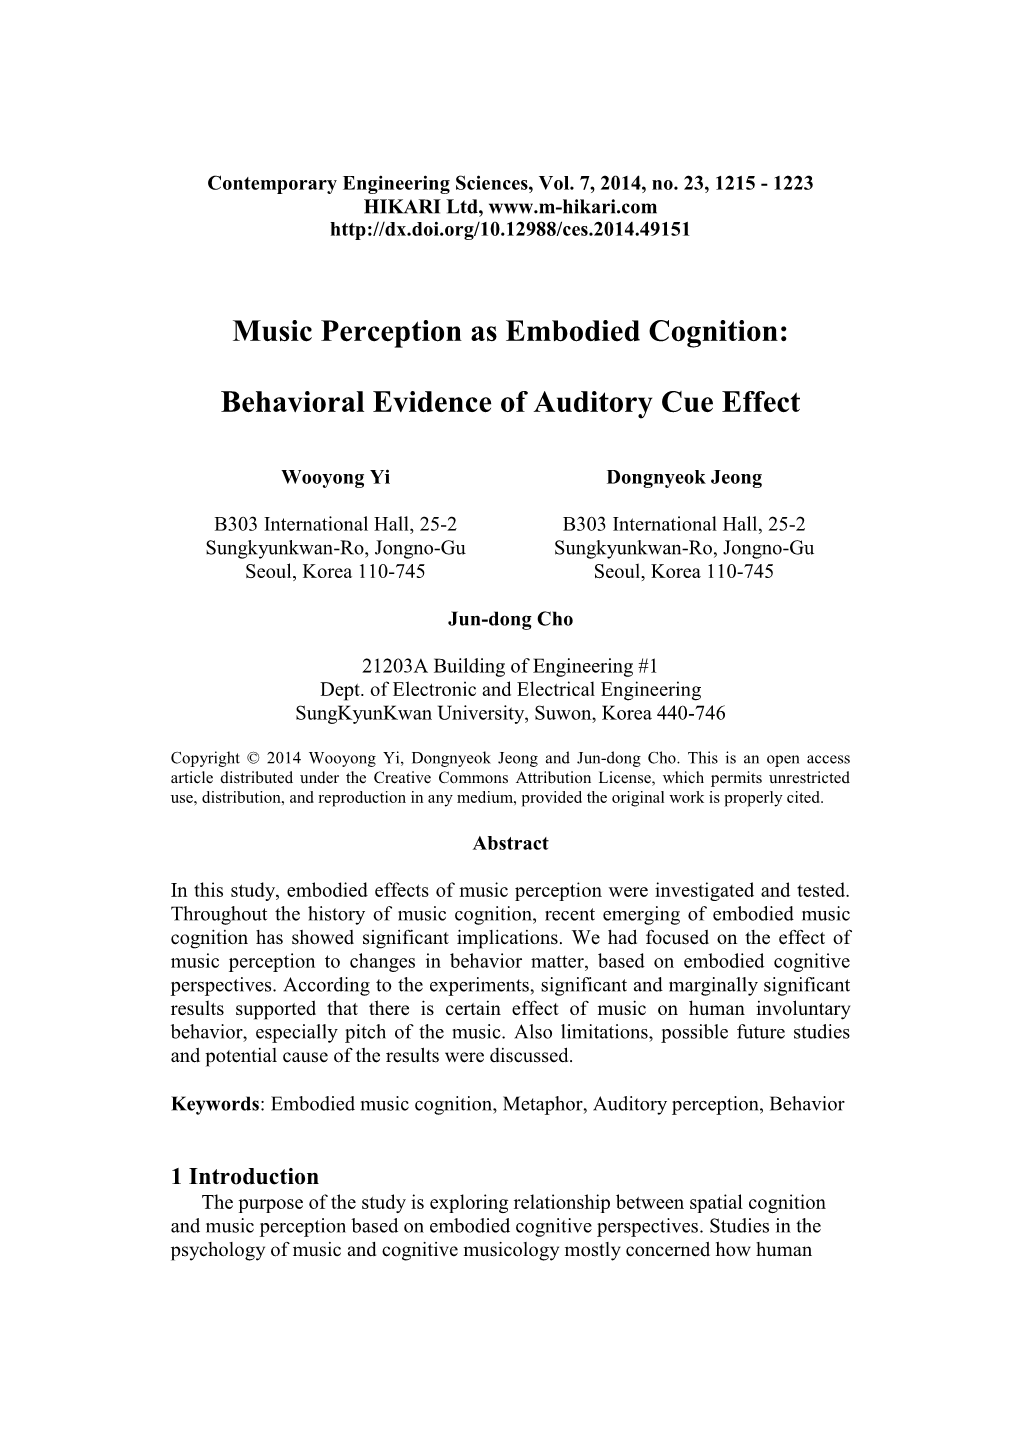 Music Perception As Embodied Cognition